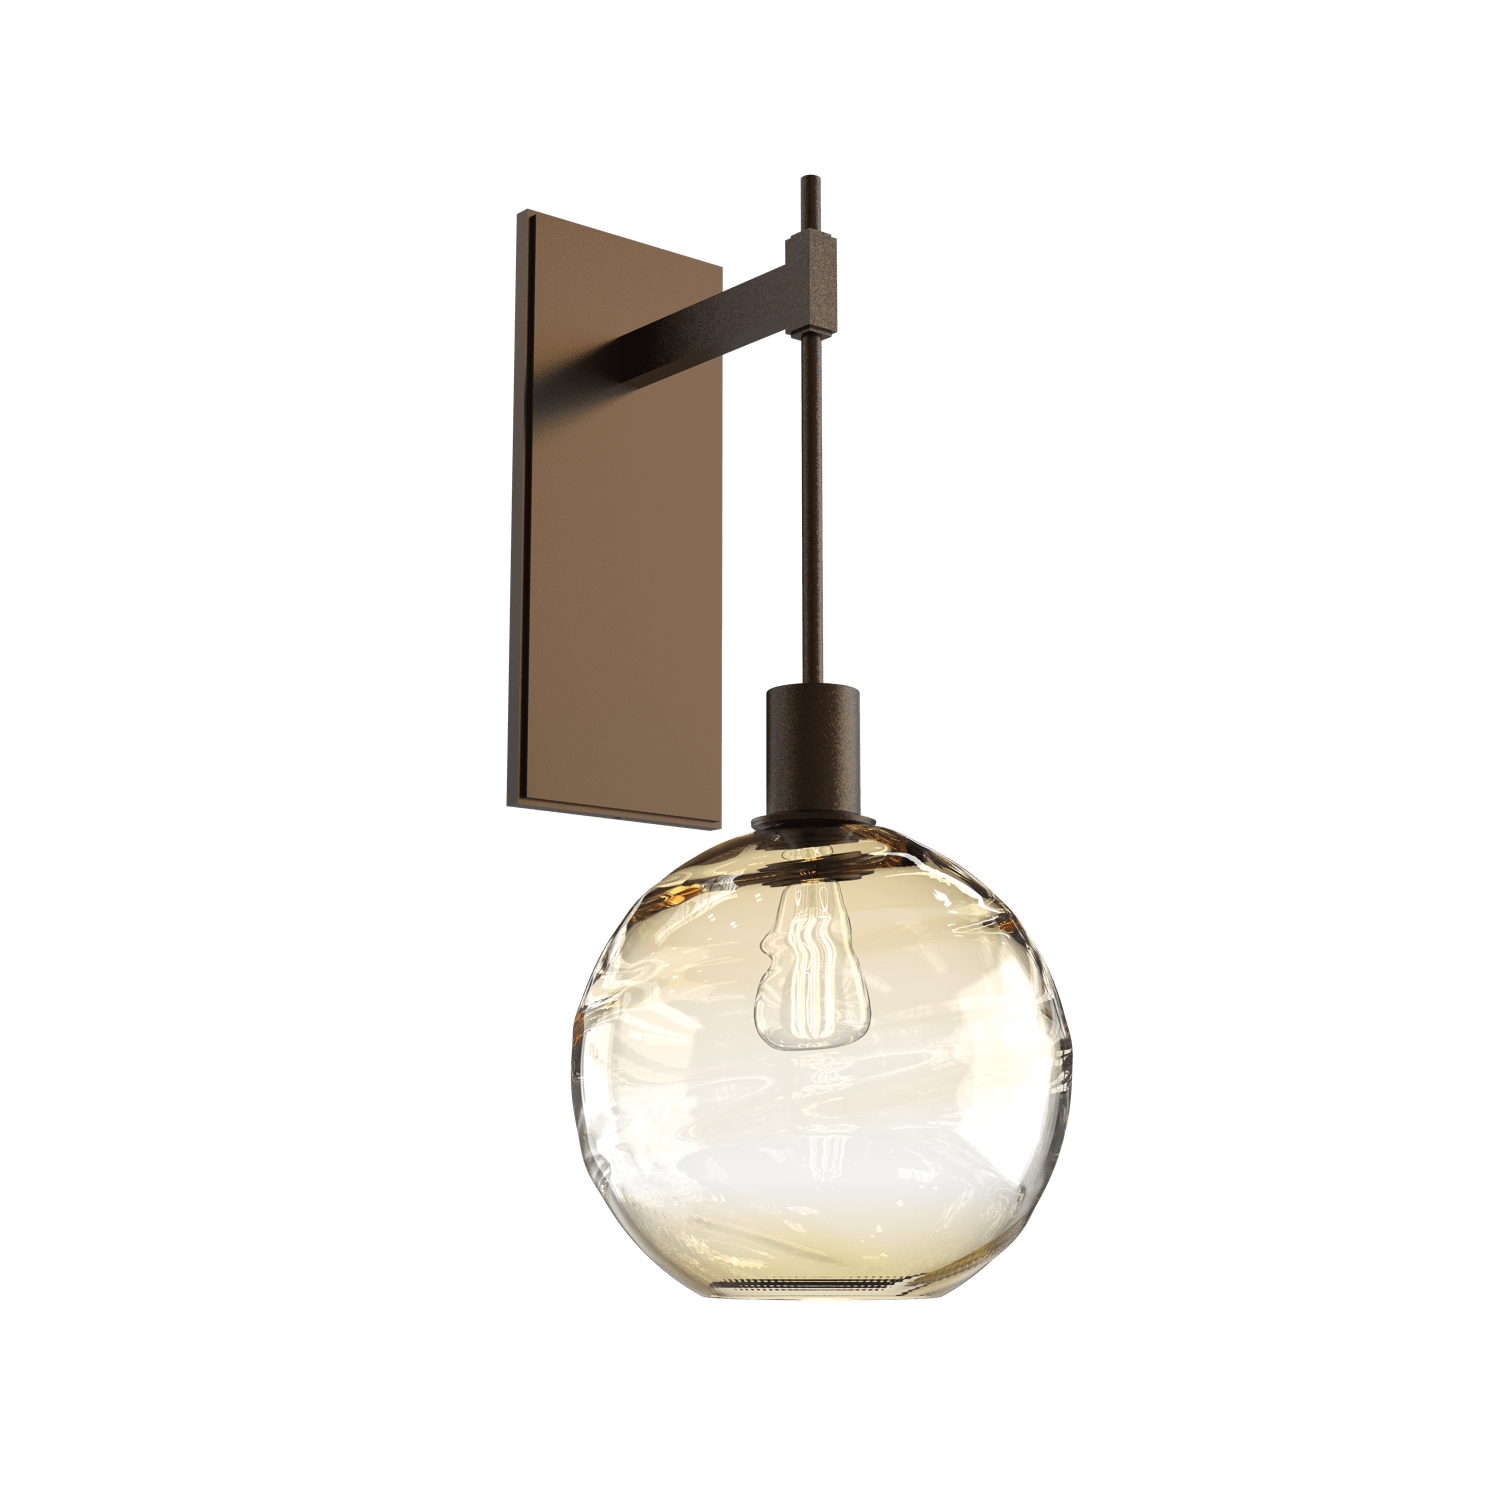 IDB0047-22-FB-OA-Hammerton-Studio-Optic-Blown-Glass-Terra-tempo-wall-sconce-with-flat-bronze-finish-and-optic-amber-blown-glass-shades-and-incandescent-lamping